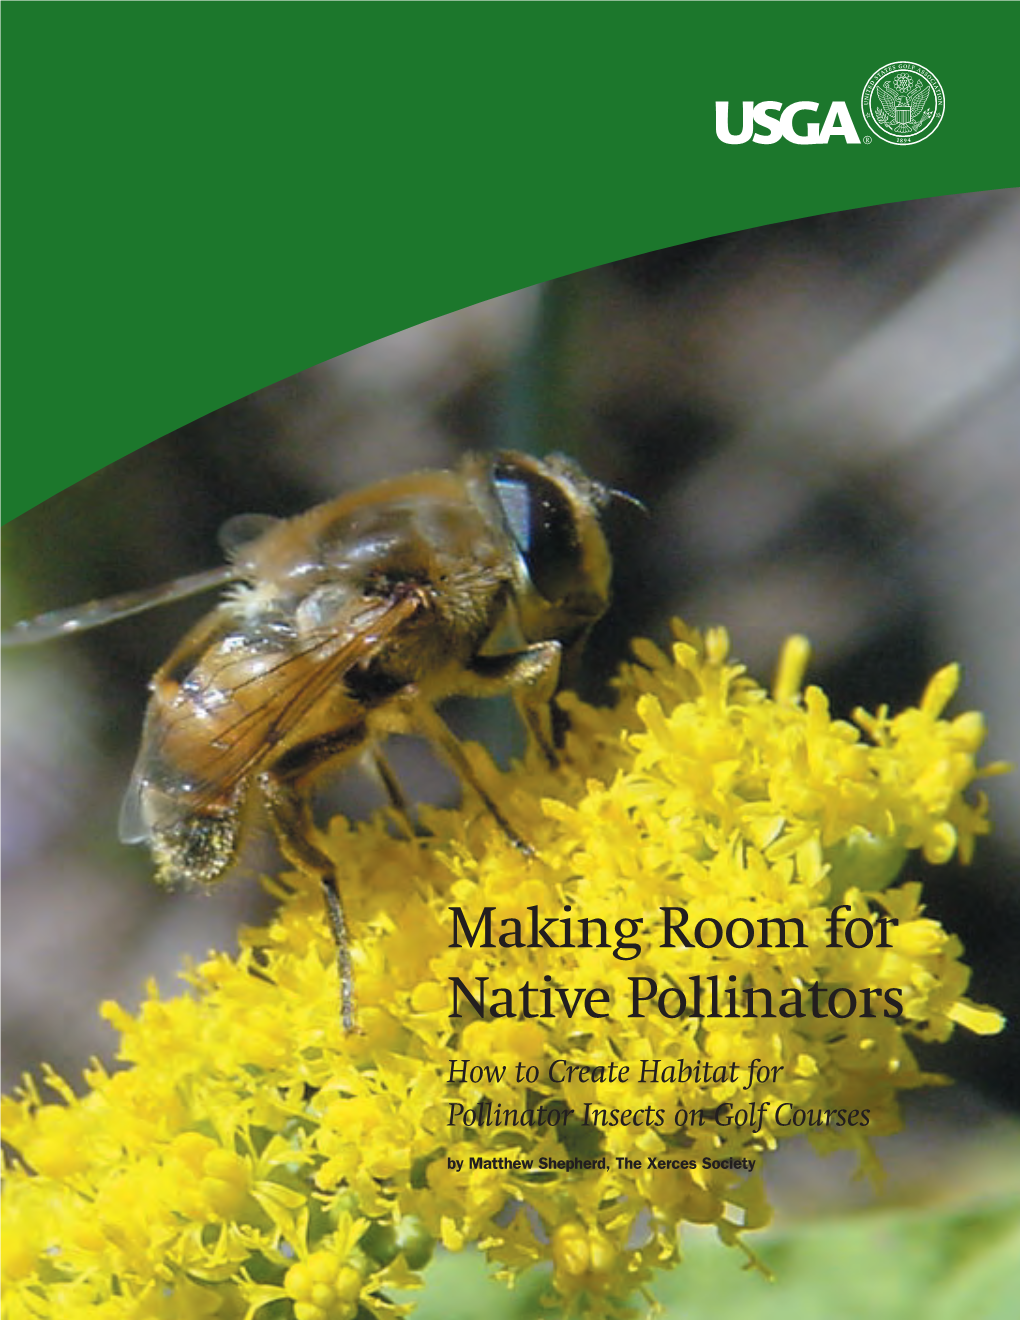 Making Room for Native Pollinators How to Create Habitat for Pollinator Insects on Golf Courses by Matthew Shepherd, the Xerces Society